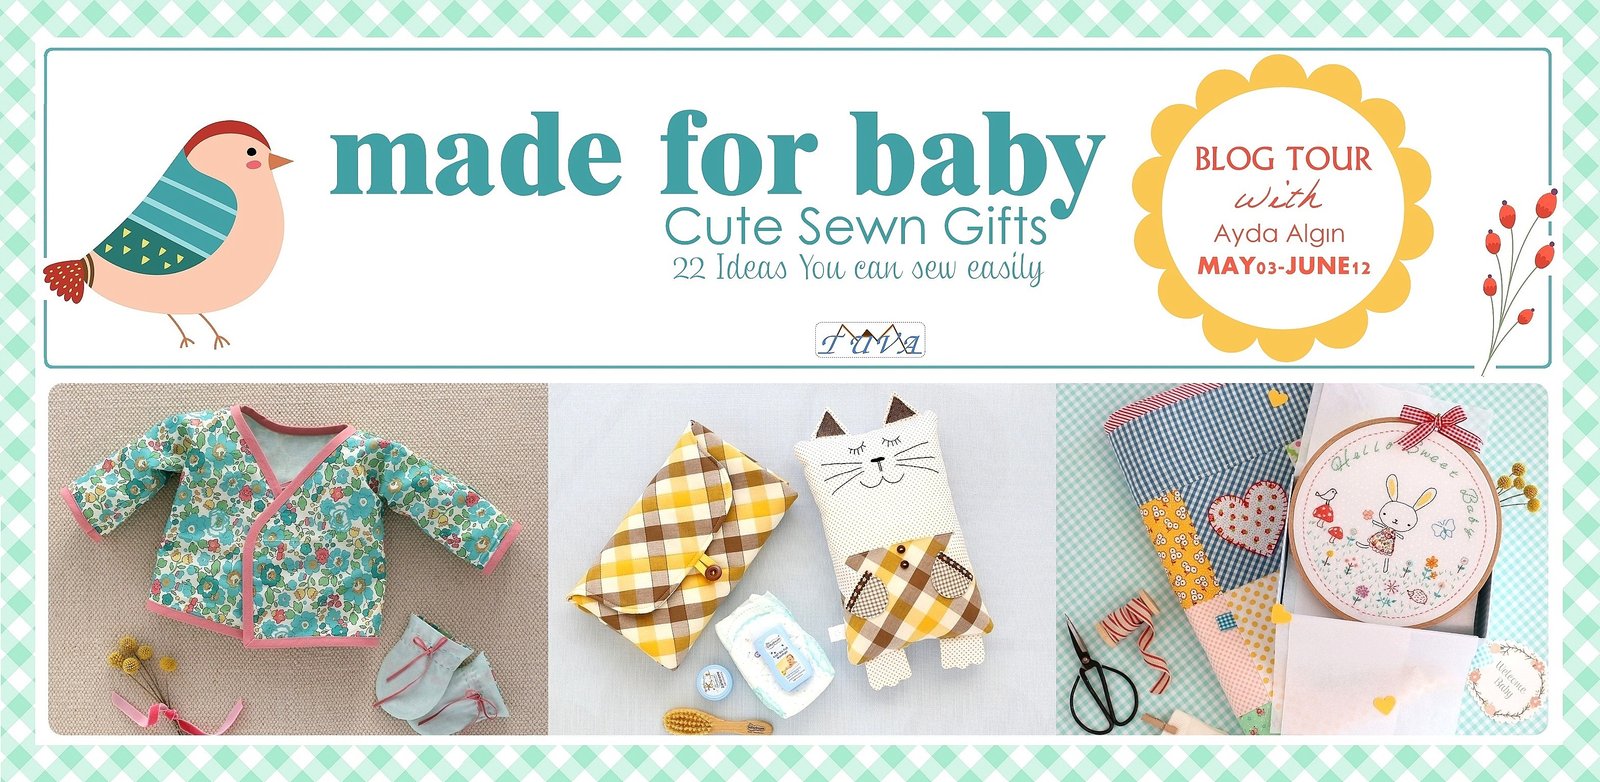 Made for Baby, Cute Sewn Gifts, by Ayda Algin